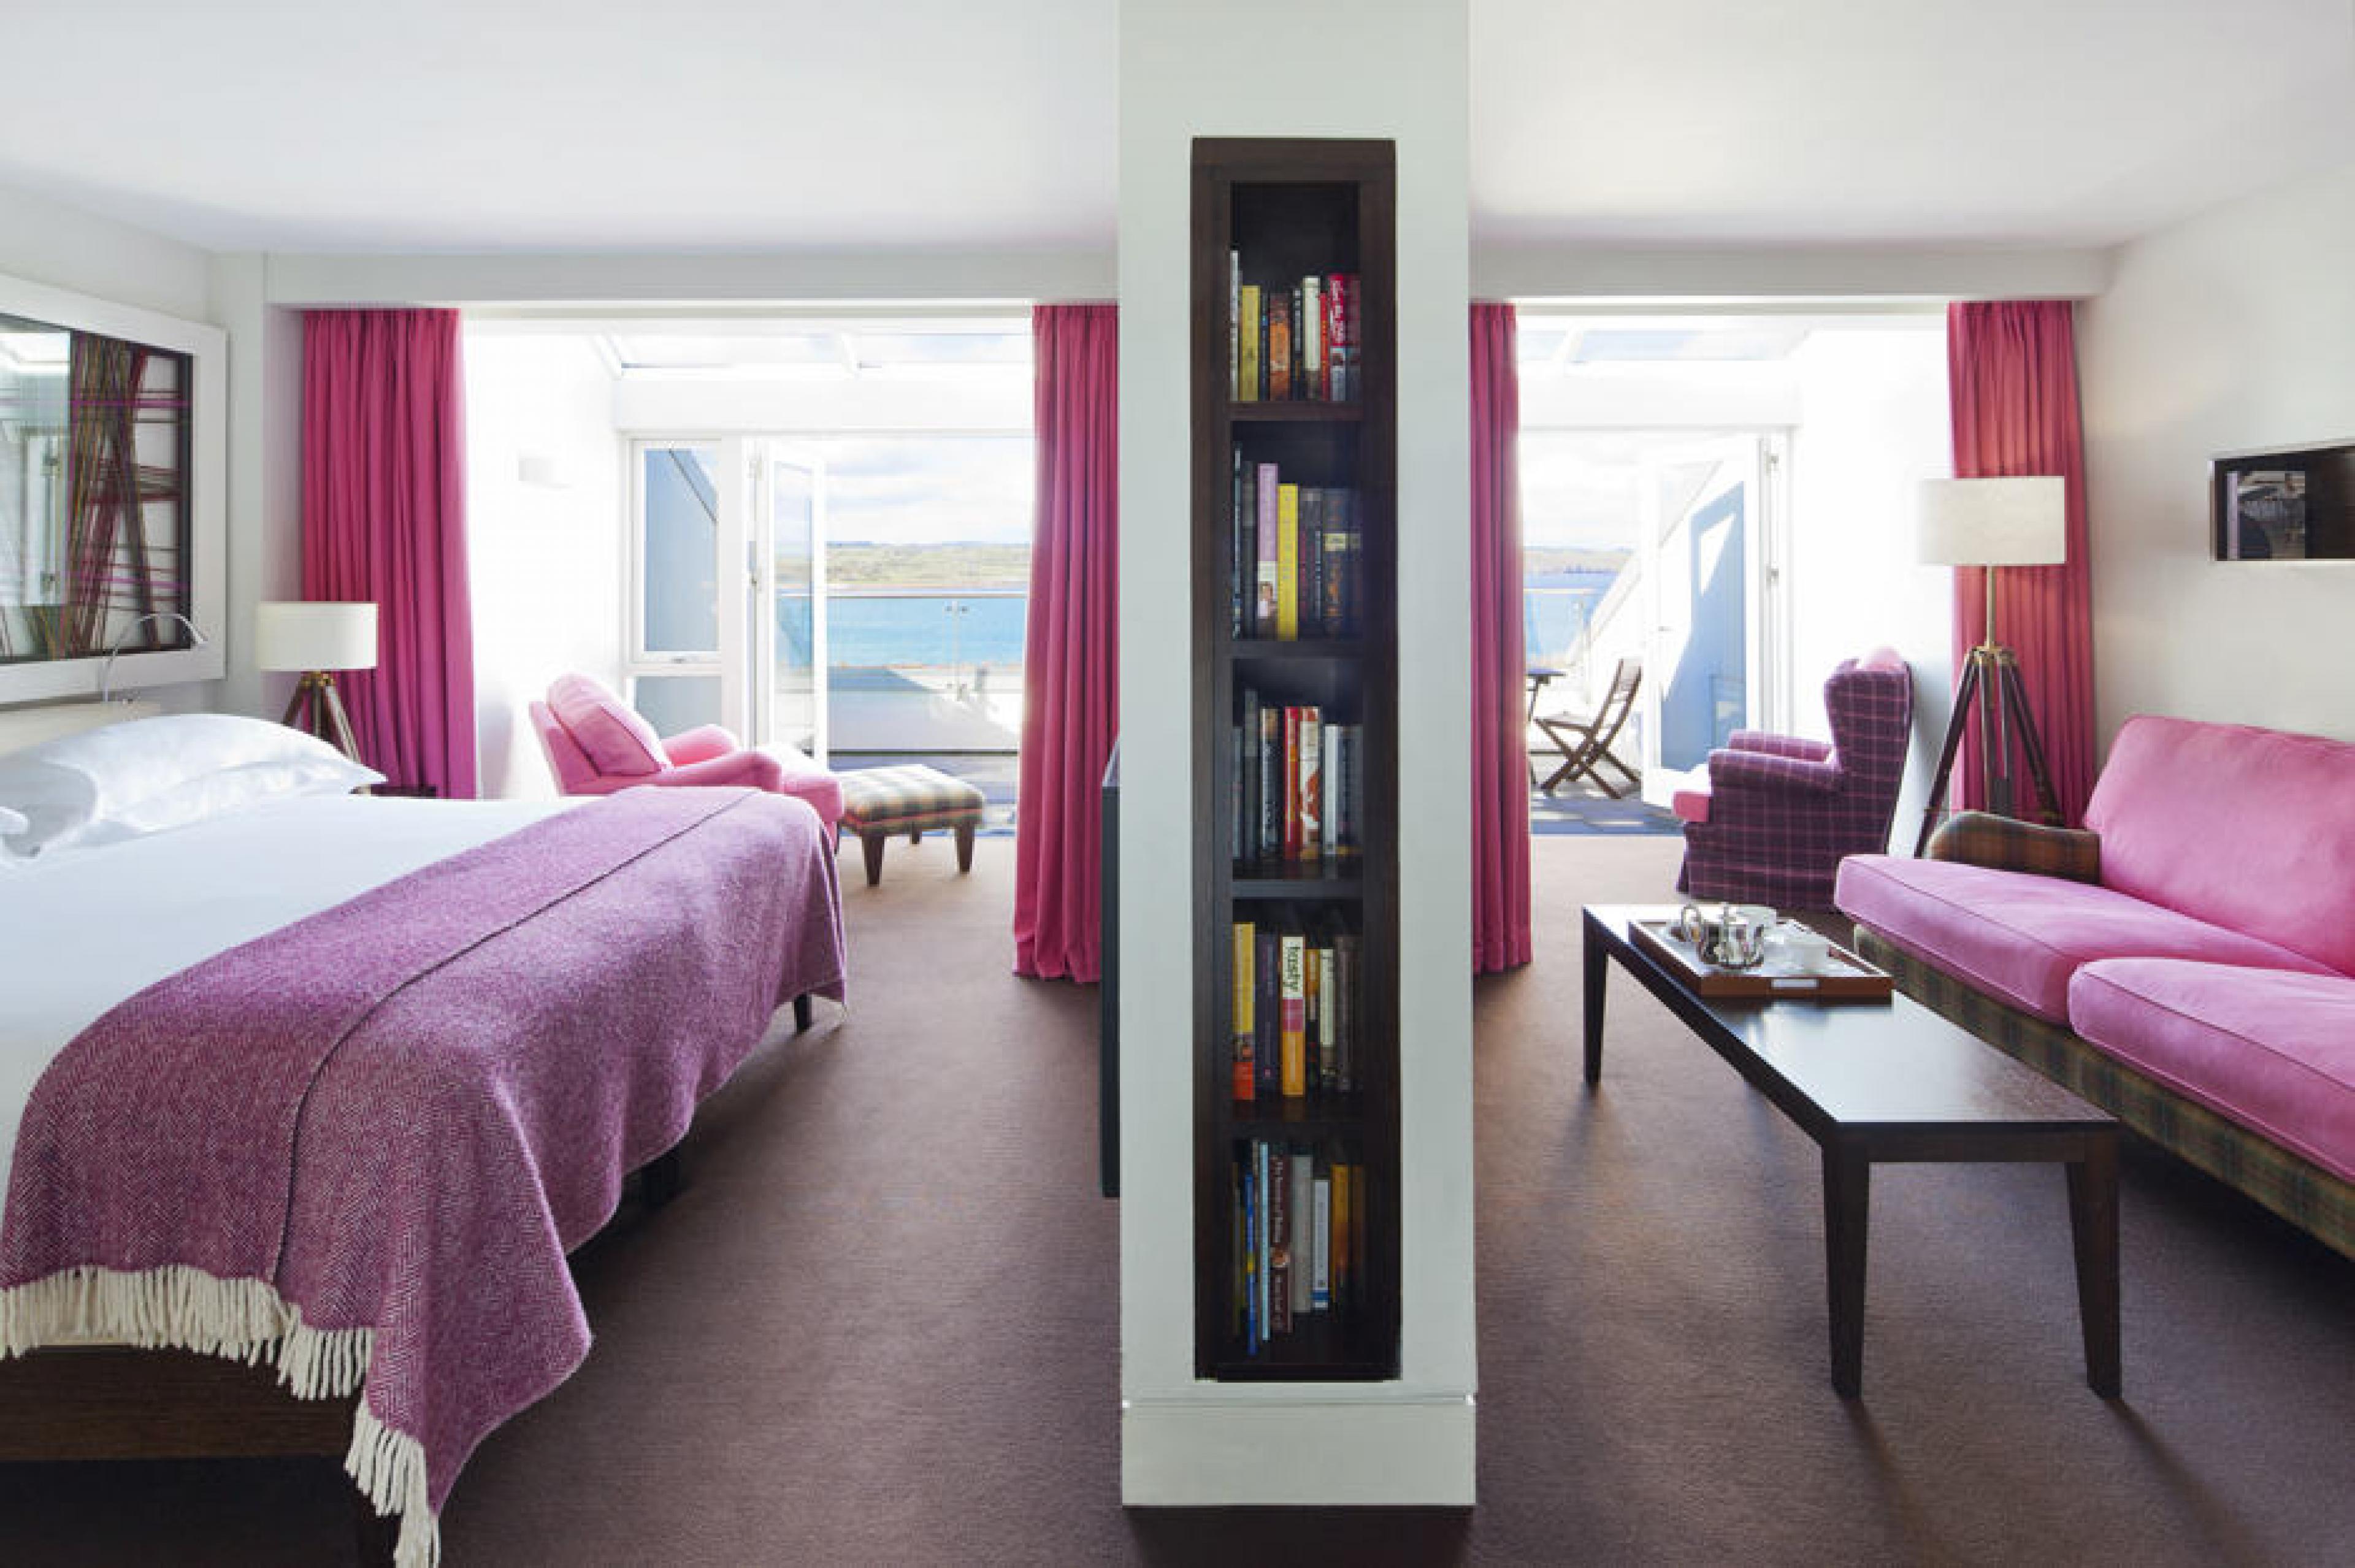 Suite at Cliff House Hotel, Ireland